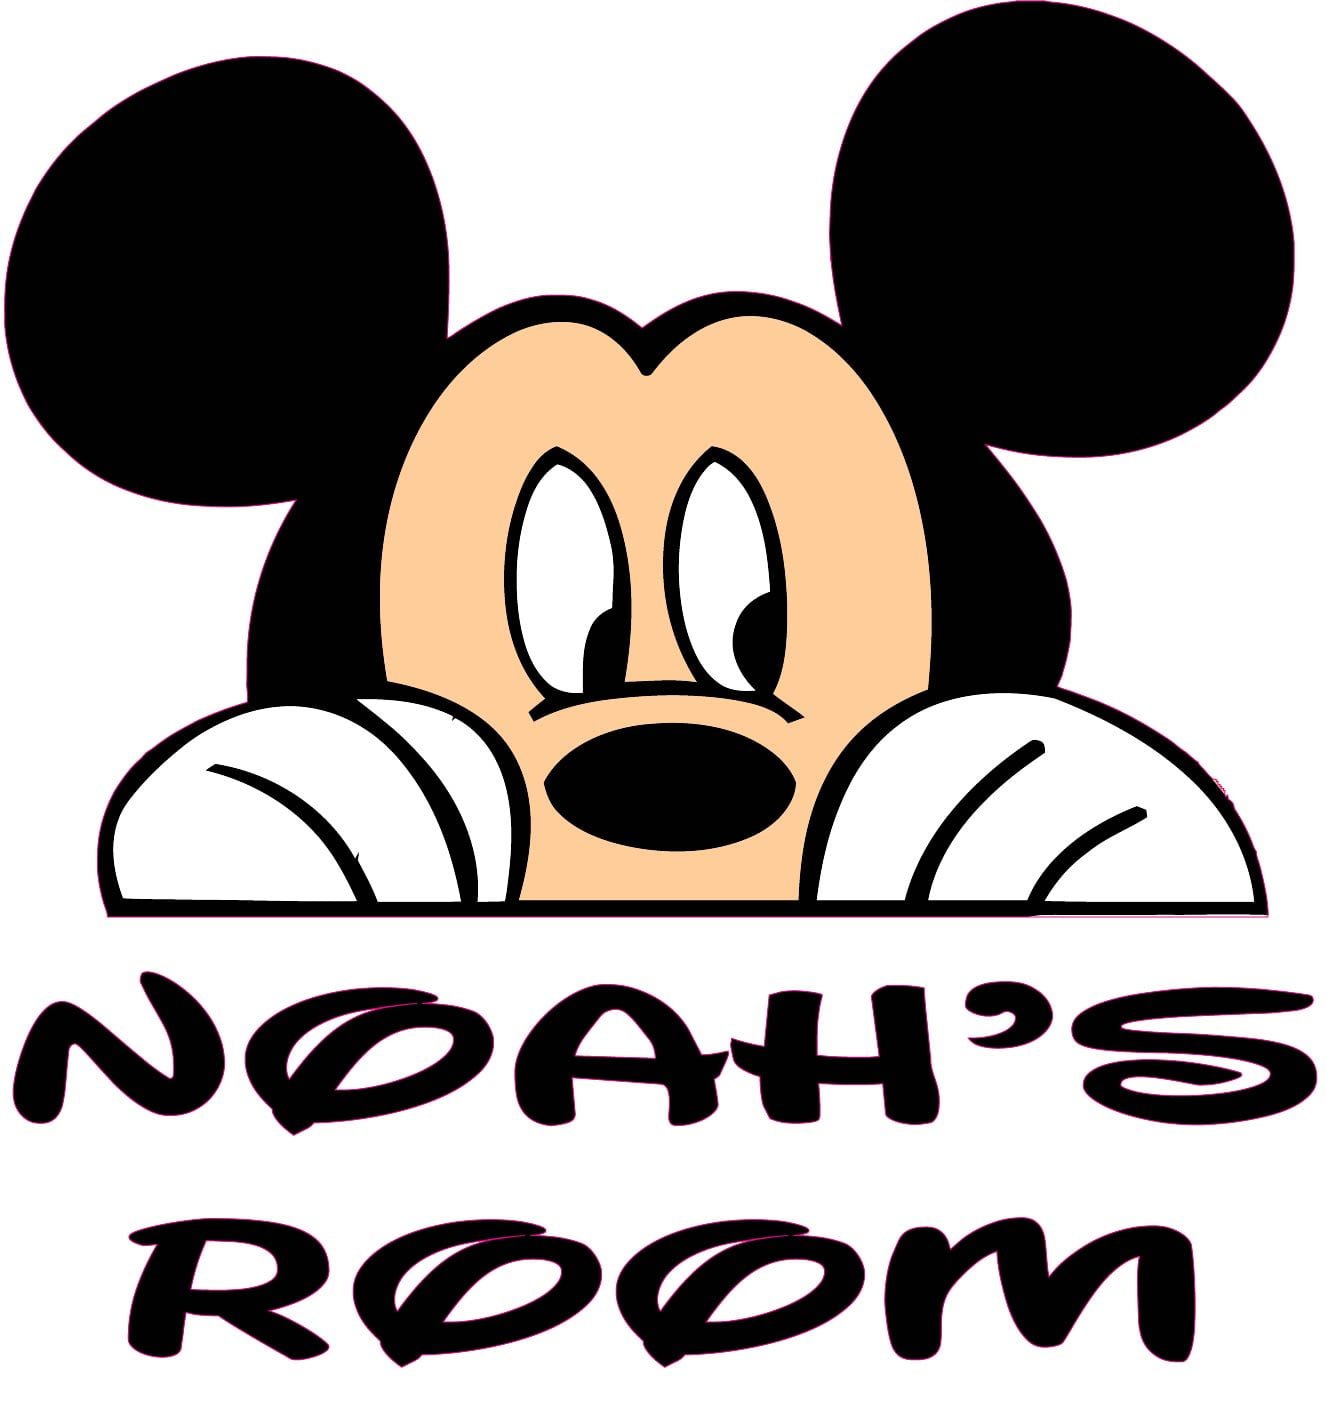 Mickey Mouse football Personalized Name Decor Vinyl Wall Sticker Decal Bedroom. 